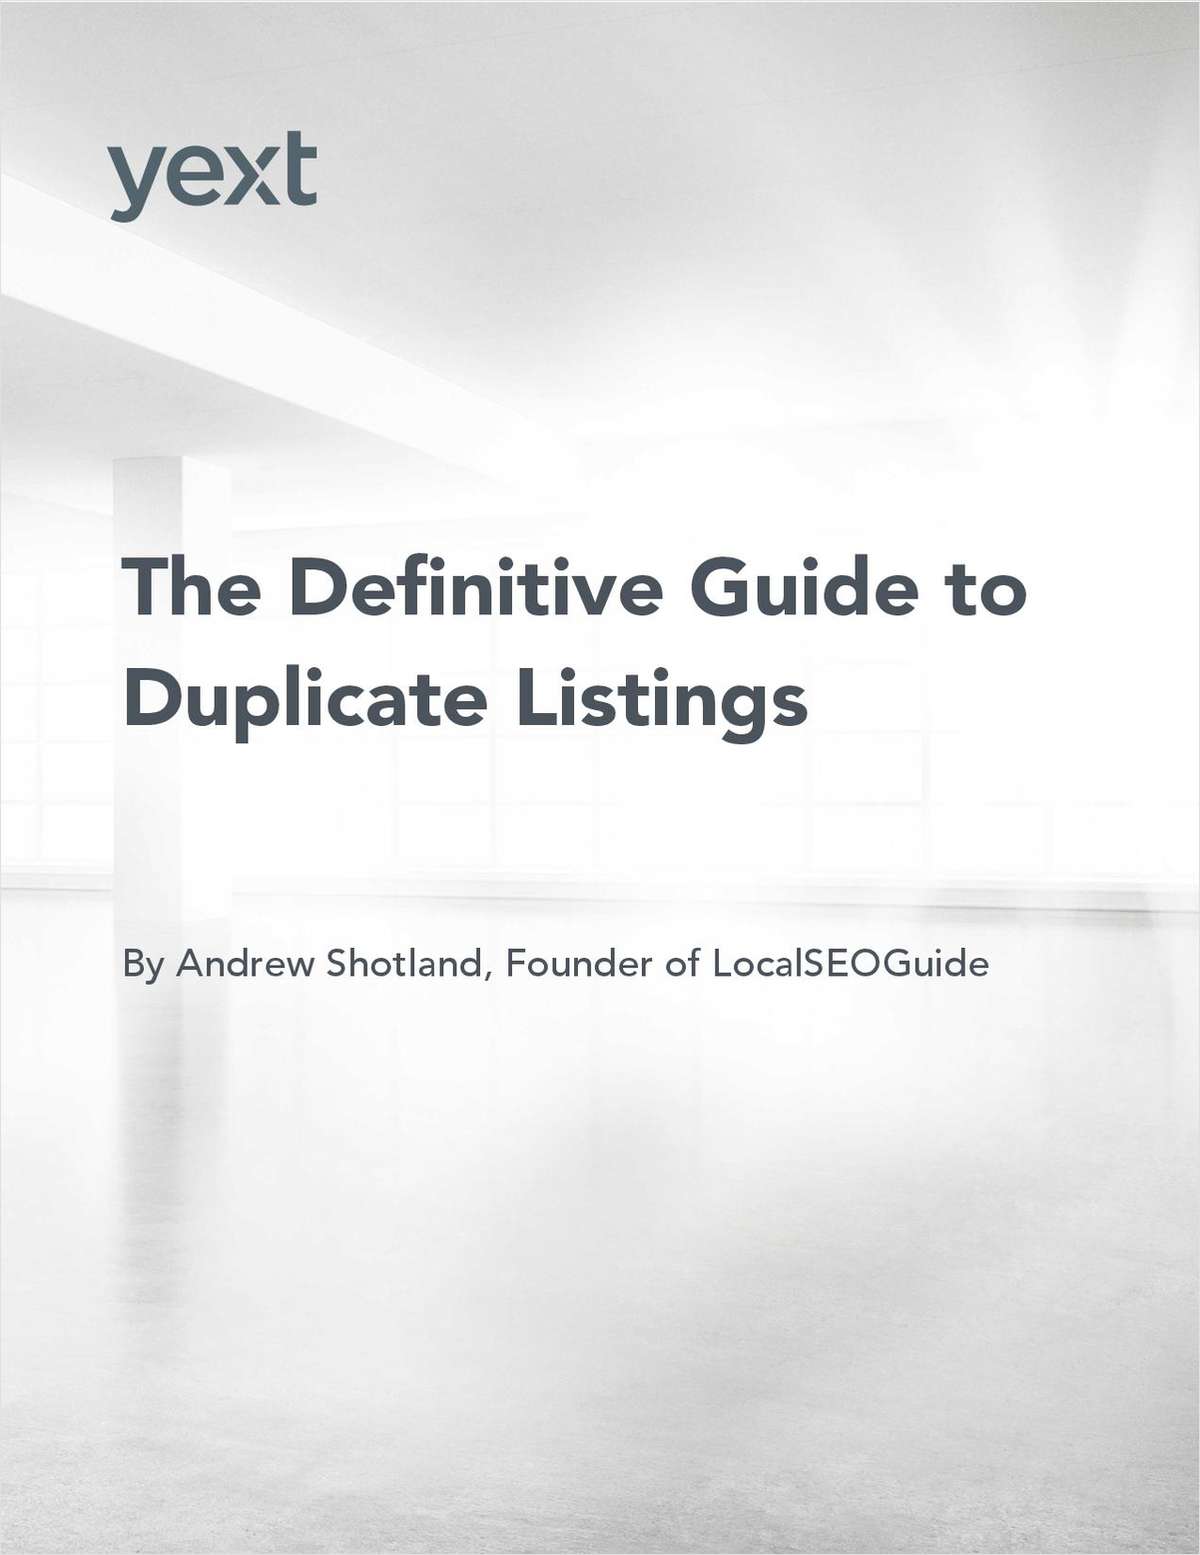 The Definitive Guide to Duplicate Listings